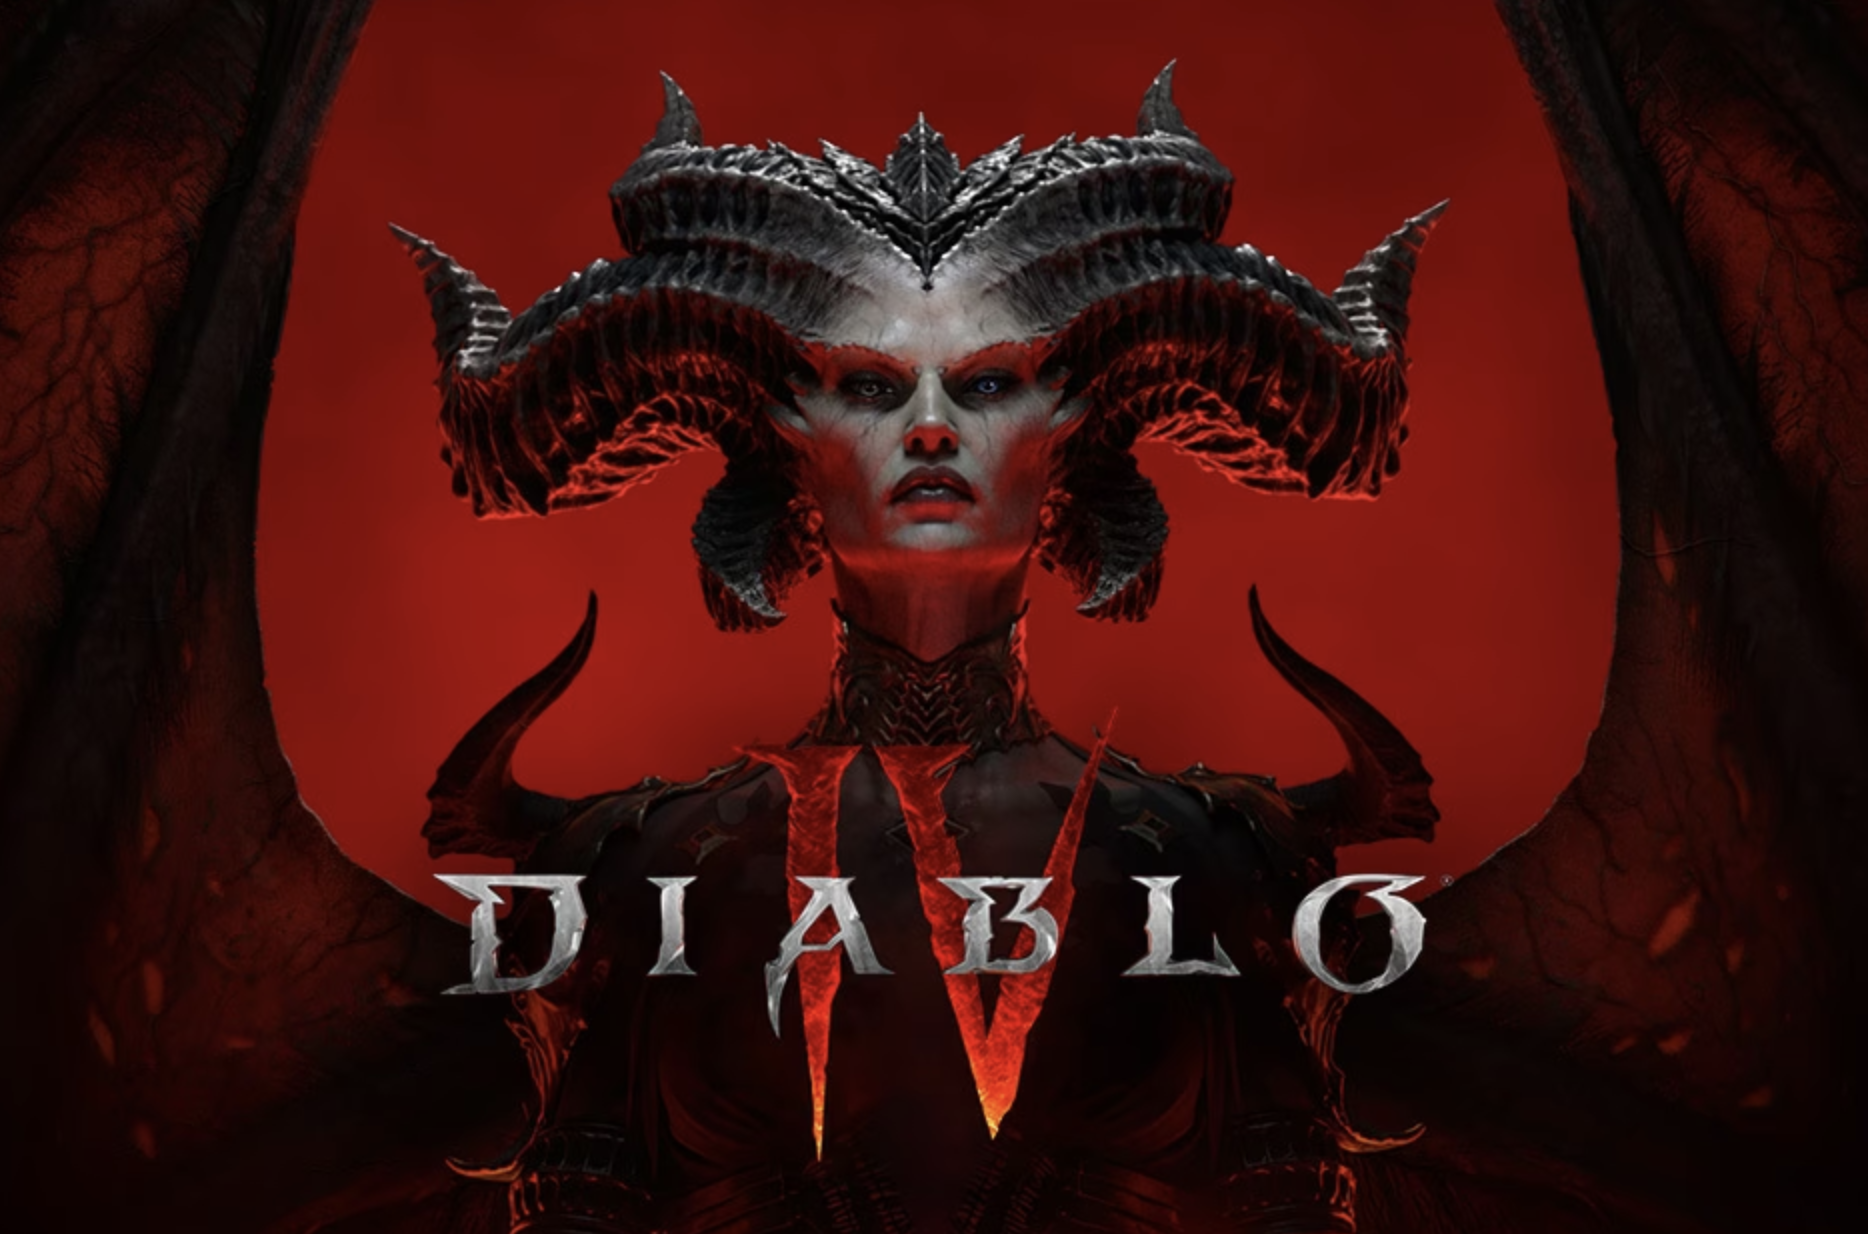 A promotional poster for Diablo 4.